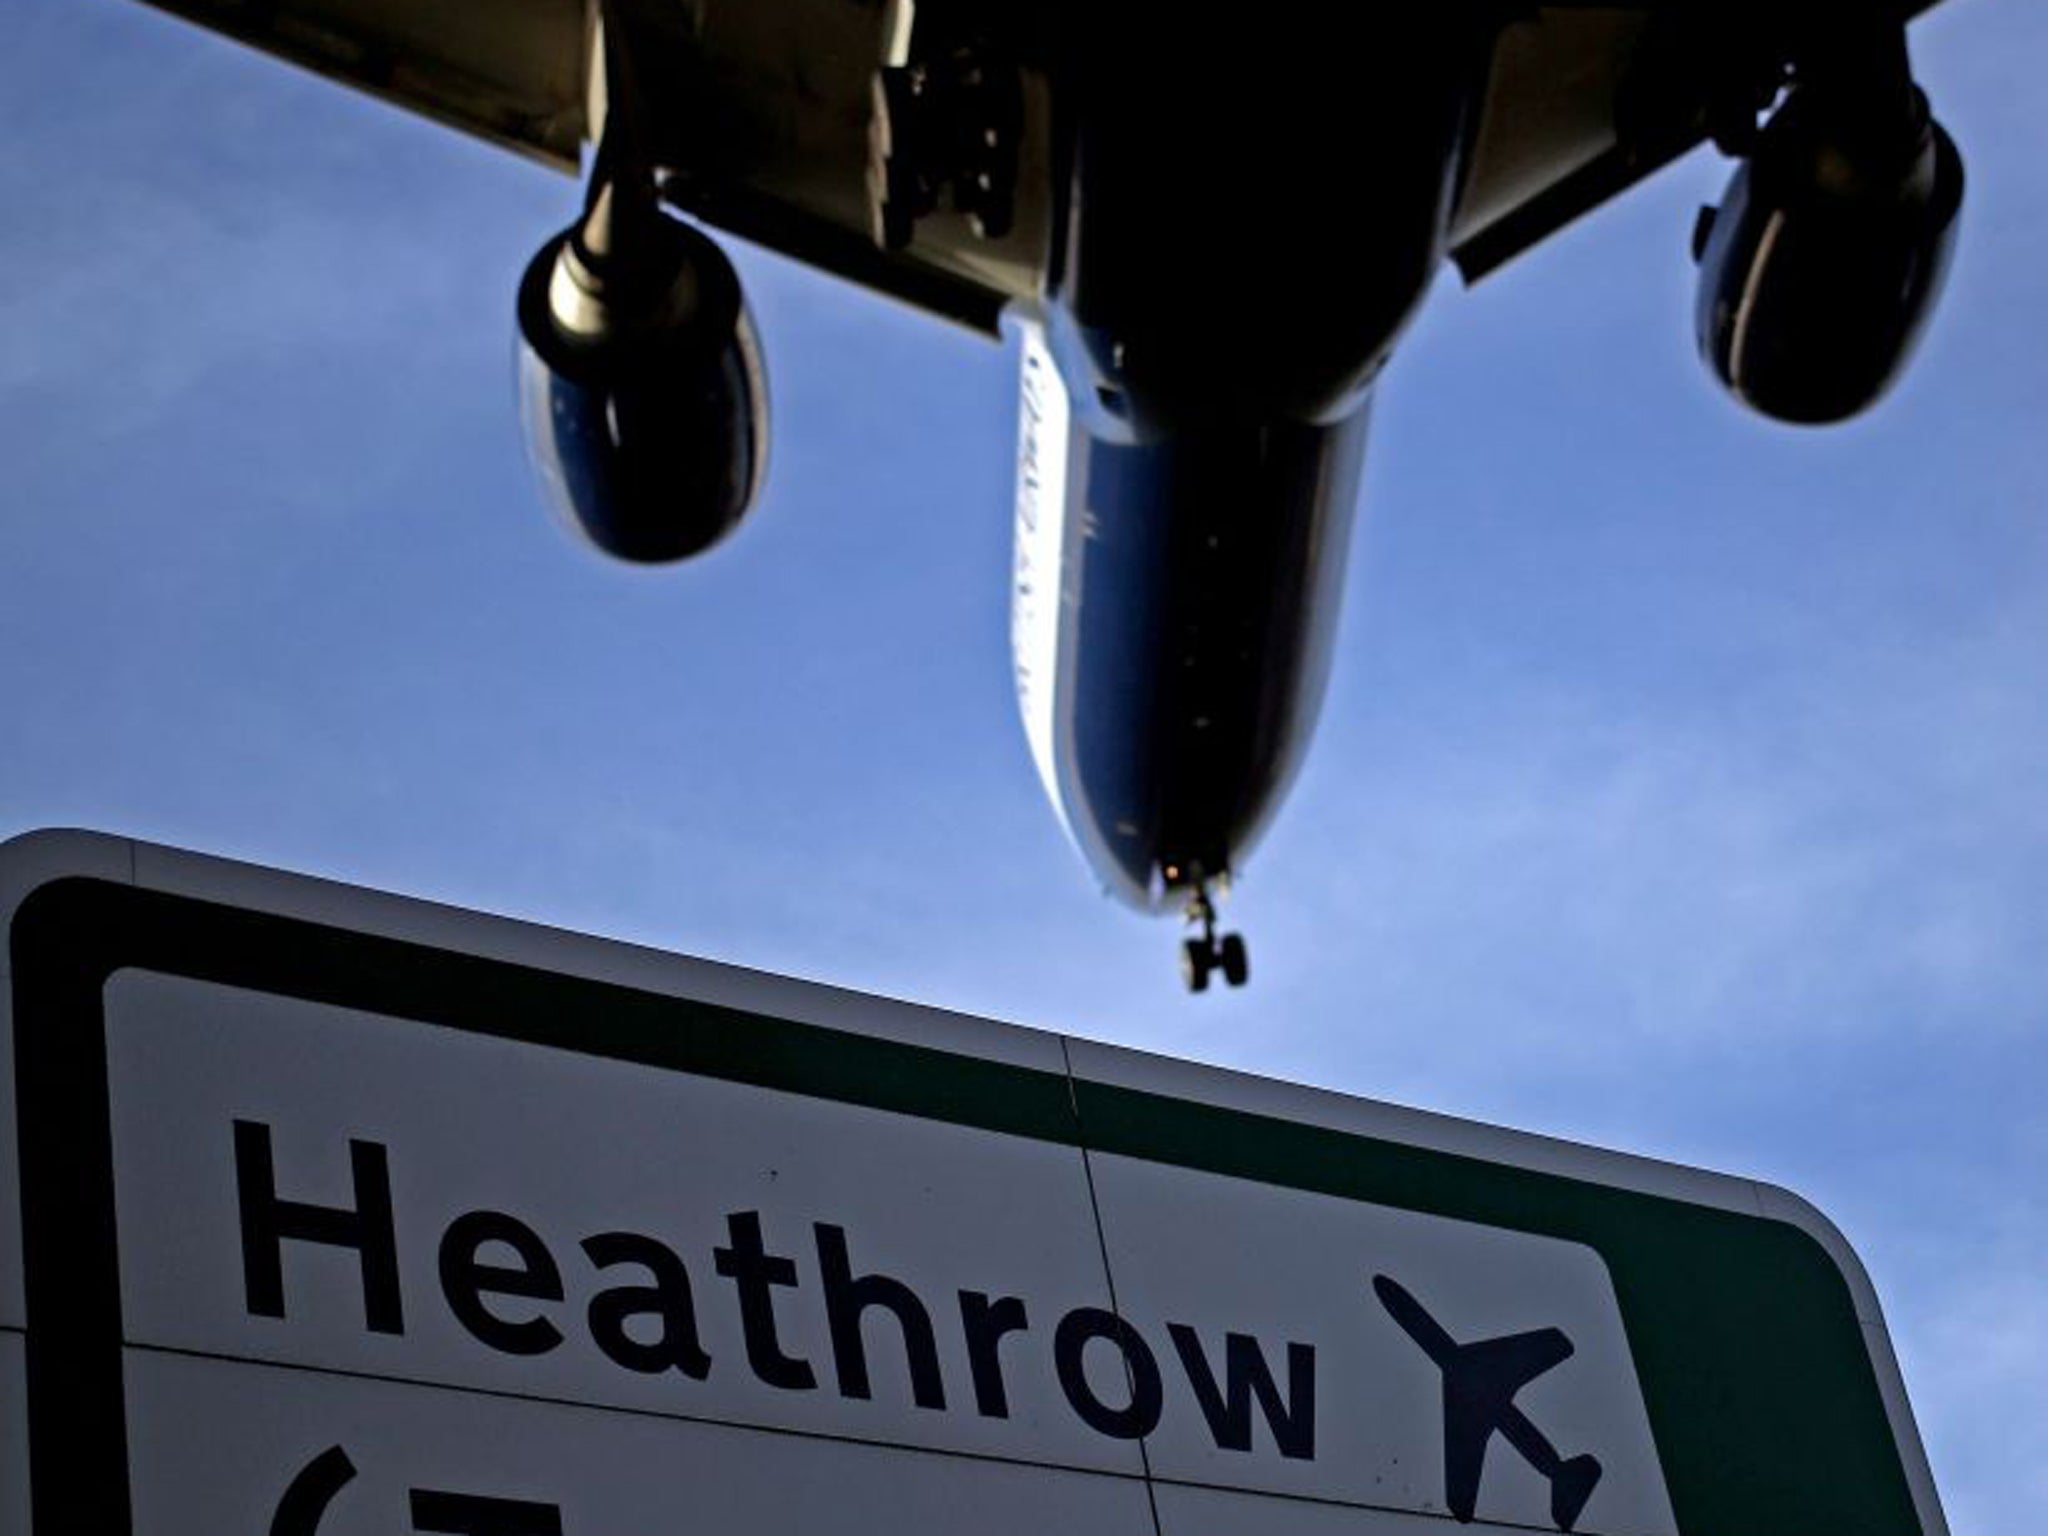 Revenues at the world’s busiest airport rose 10.8% to £576 million Photo: PA